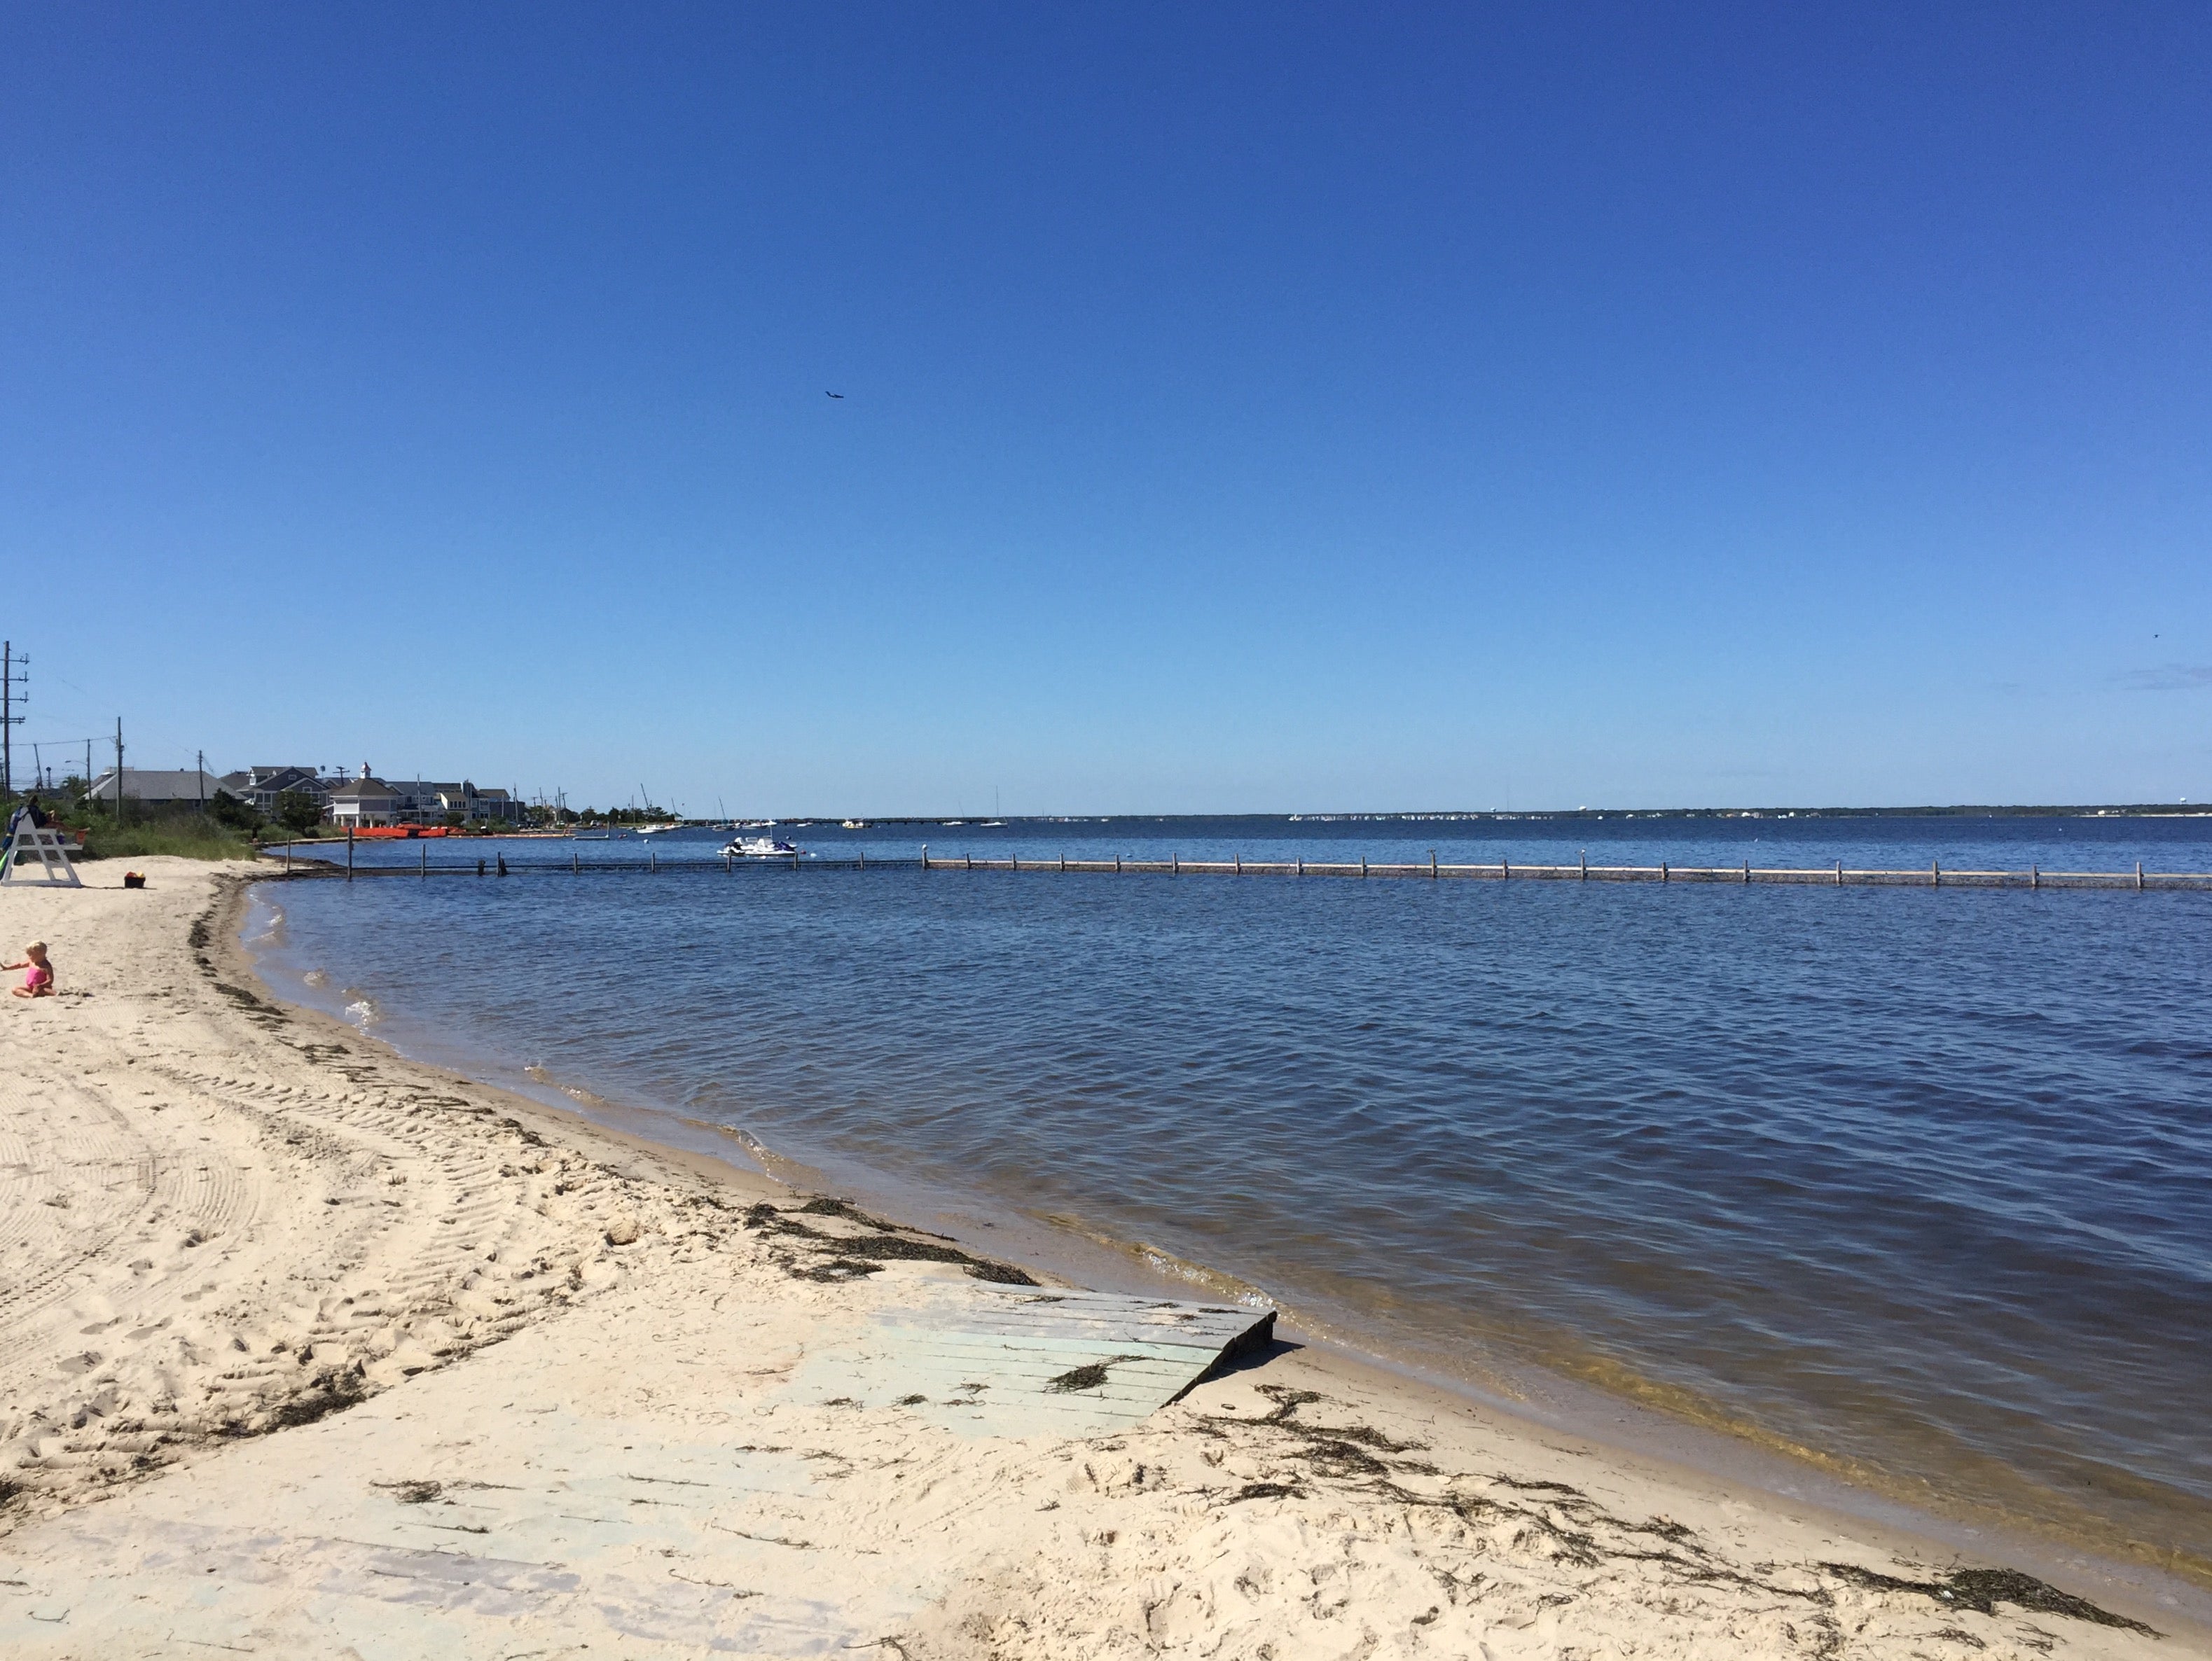  The 5th Avenue bay beach in Seaside Park on Aug. 13, 2015.  